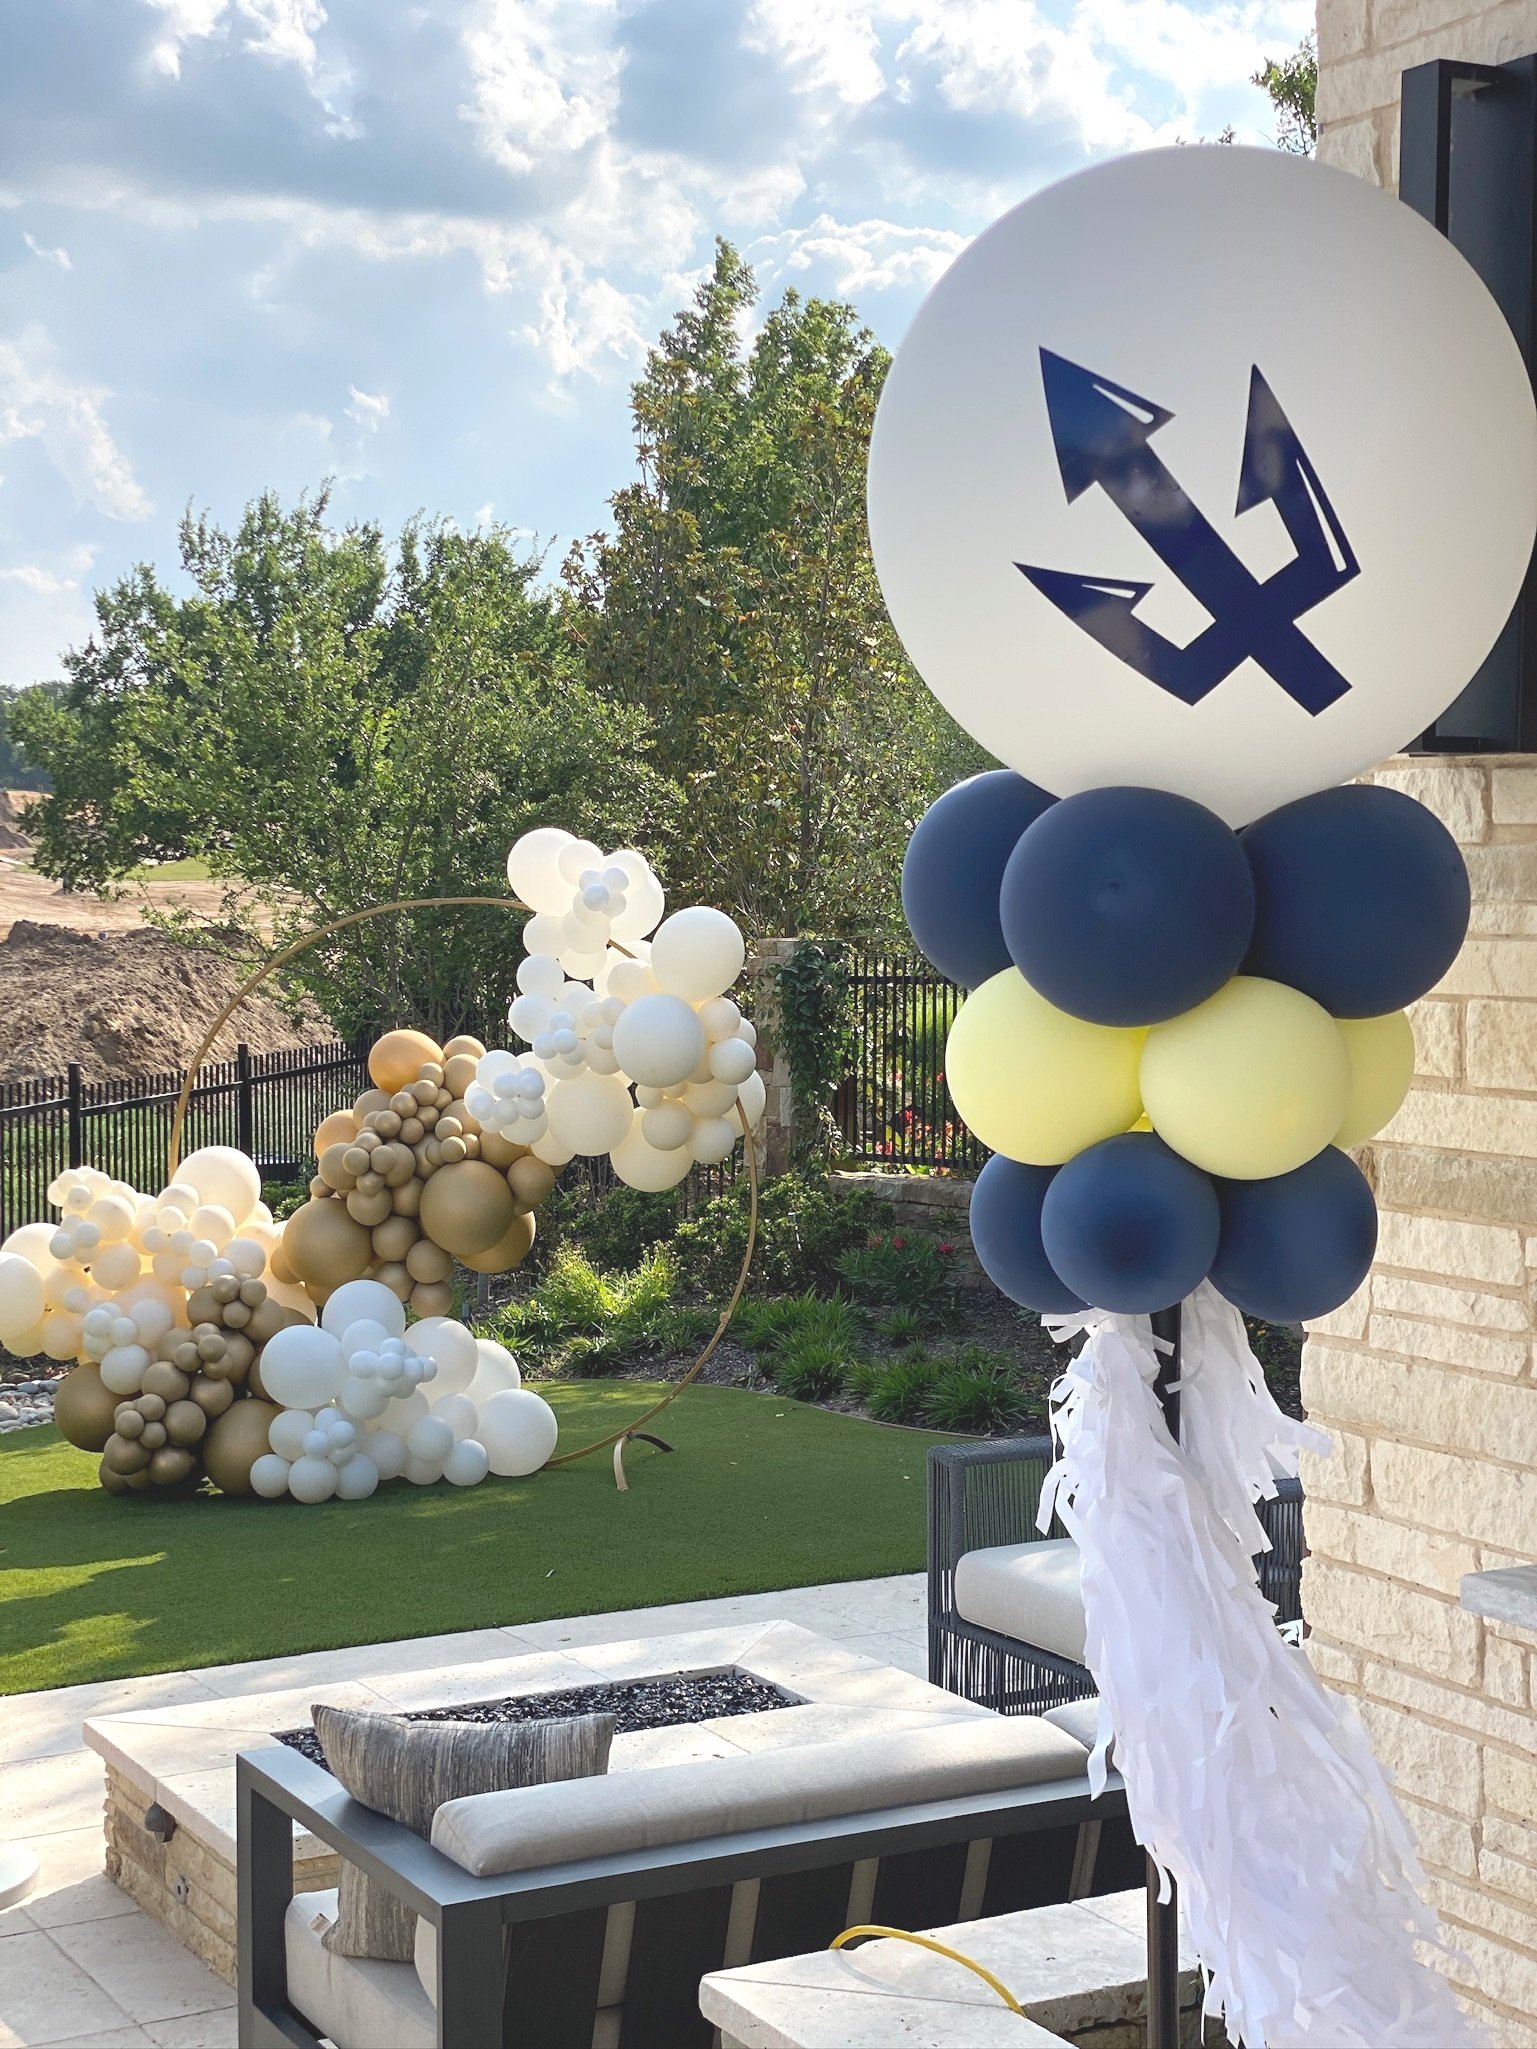 Jumbo balloon topper perfect addition to this high school graduation party.